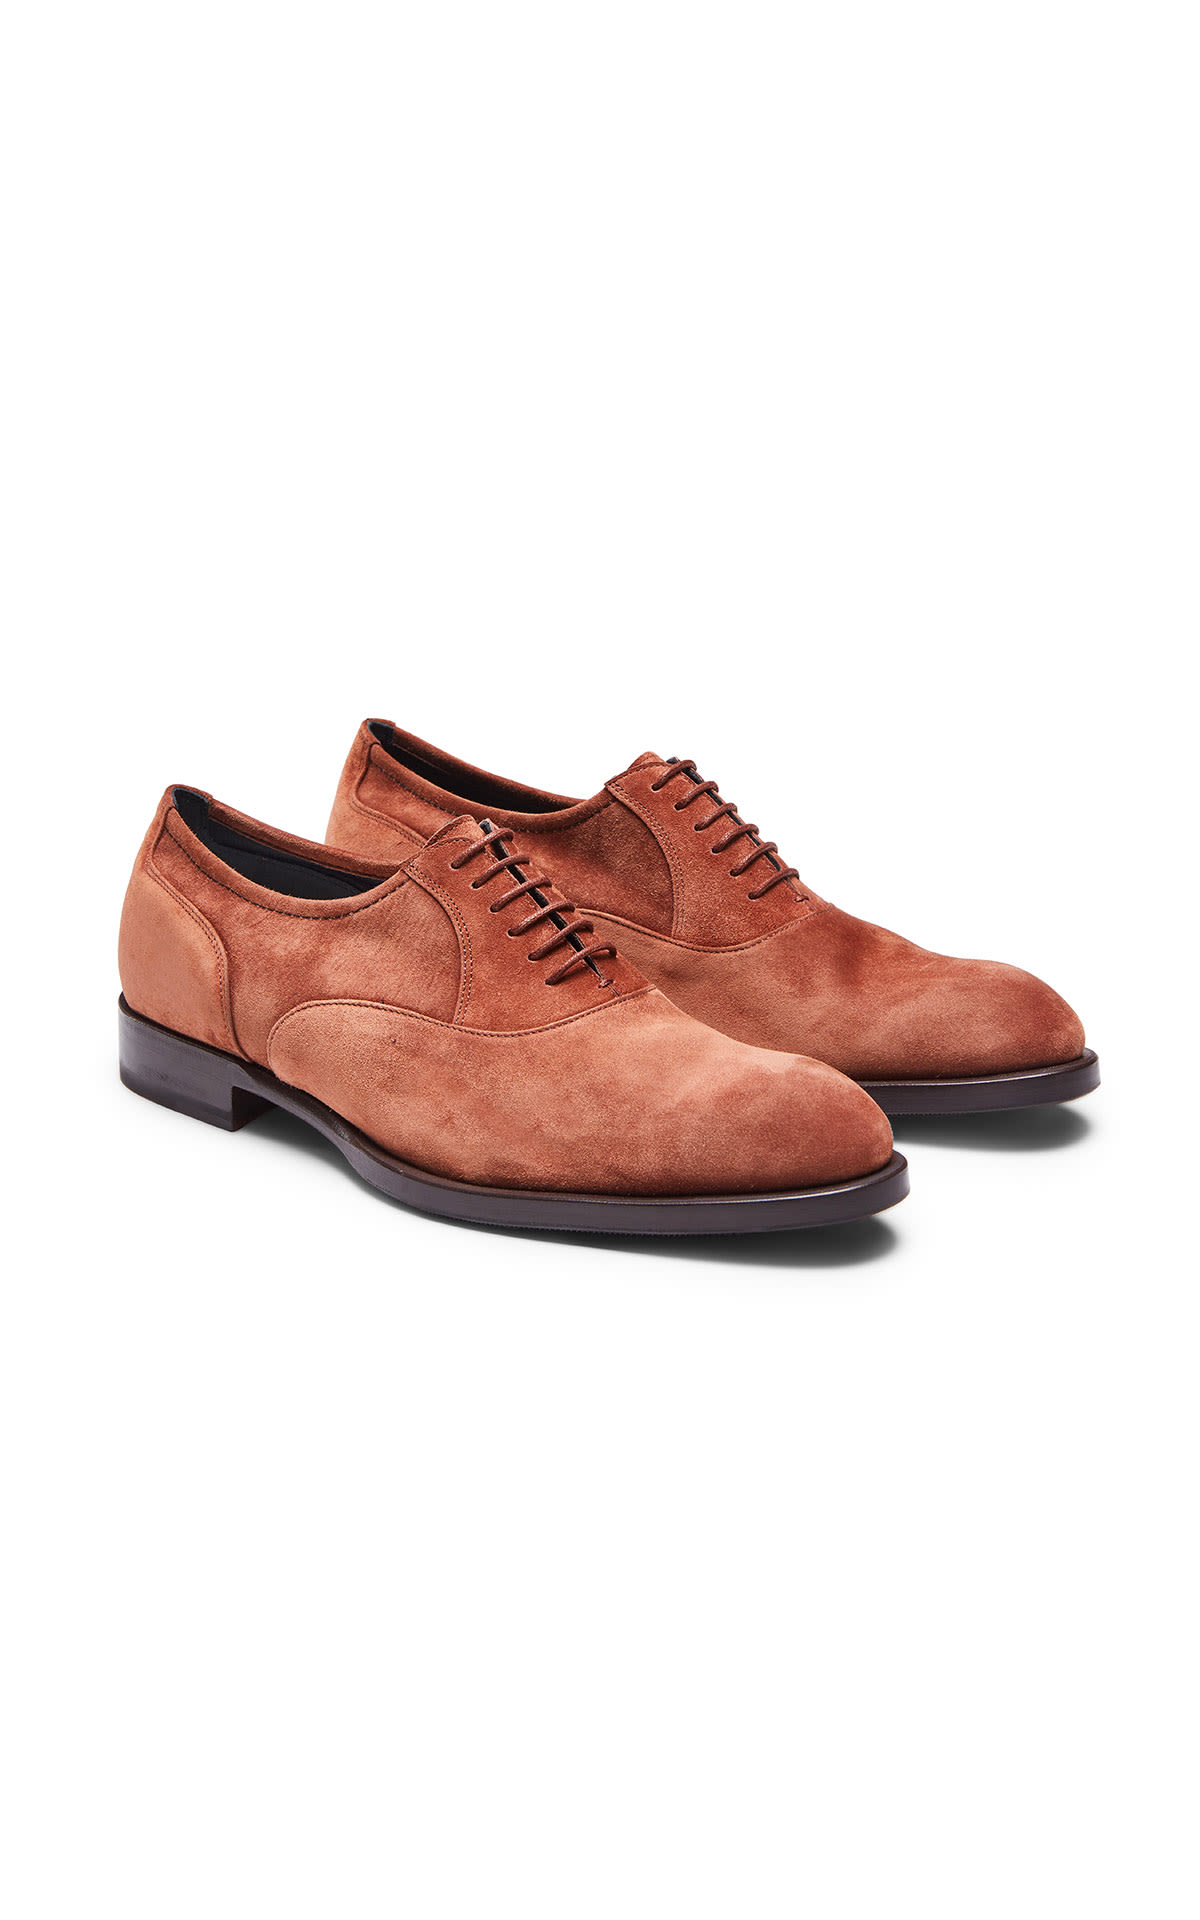 Fratelli rossetti Suede shoes